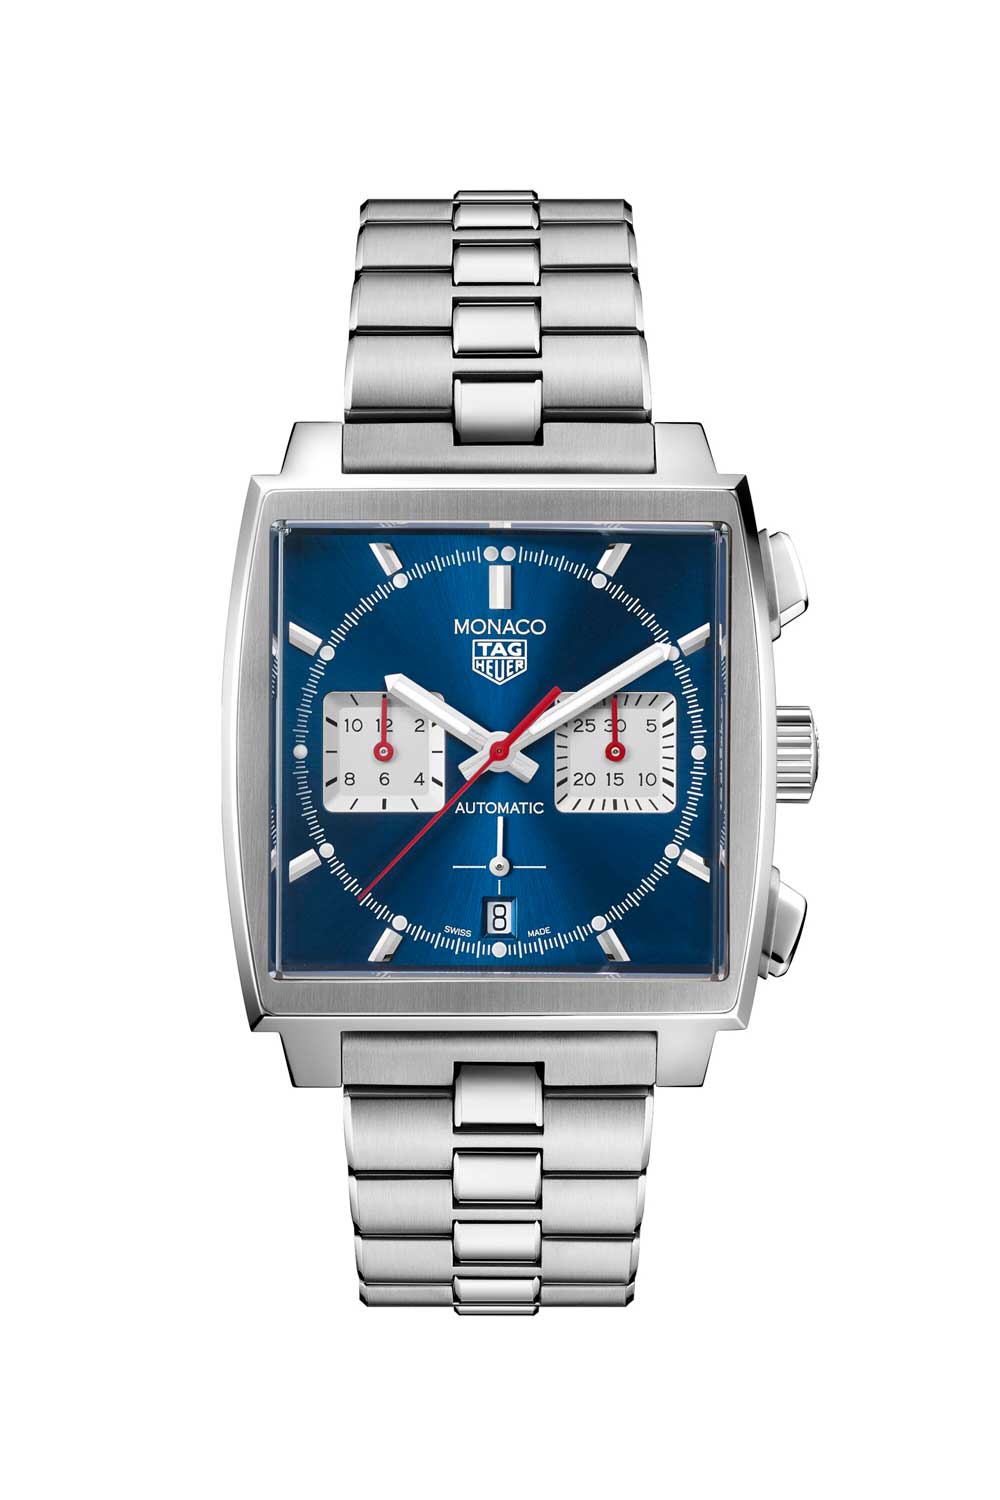 The TAG Heuer Monaco Chronograph 39mm Calibre Heuer 02 Automatic ref. CBL2111.BA0644 with the blue dial